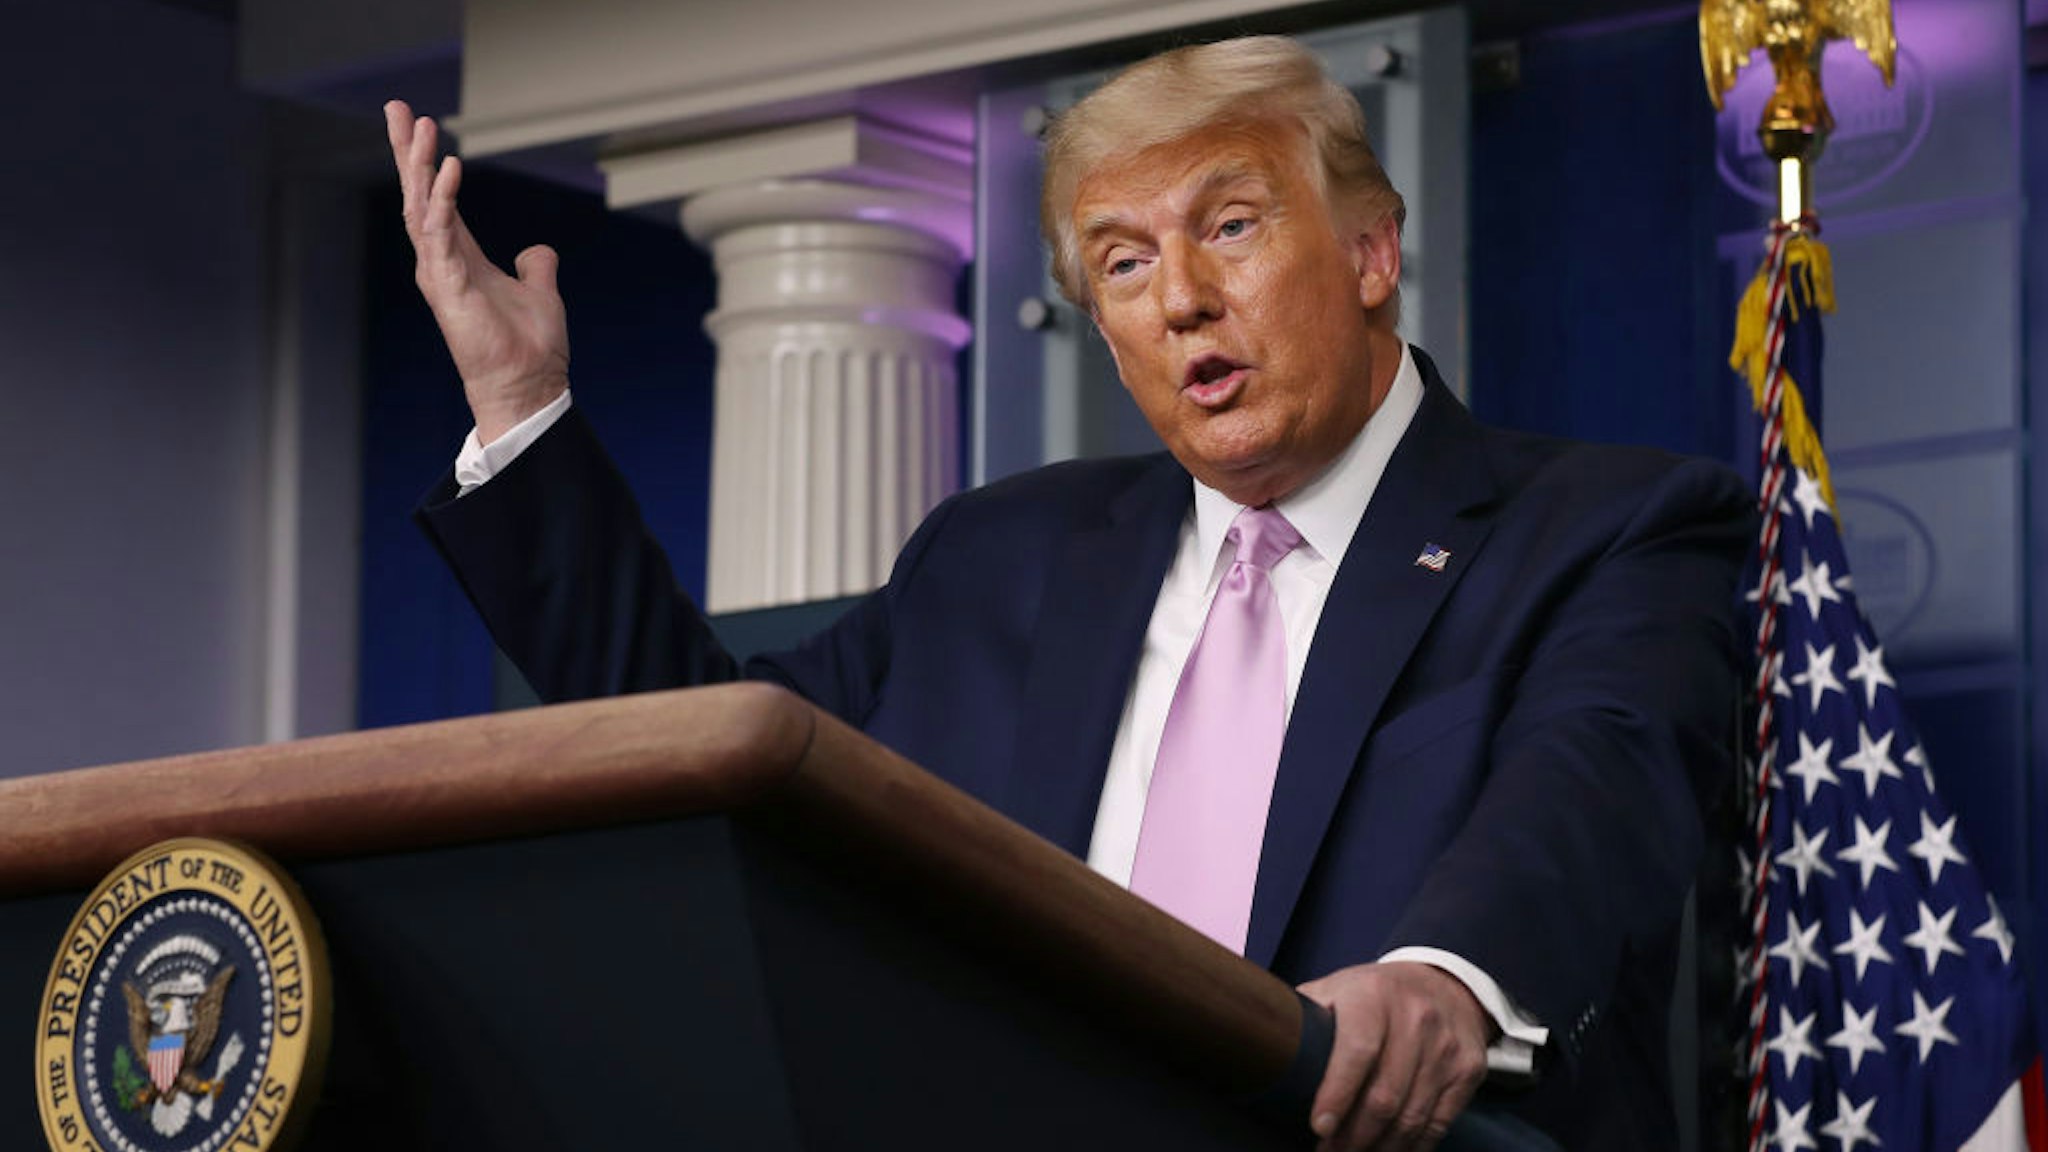 U.S. President Donald Trump holds a news conference in the Brady Press Briefing Room at the White House August 19, 2020 in Washington, DC.